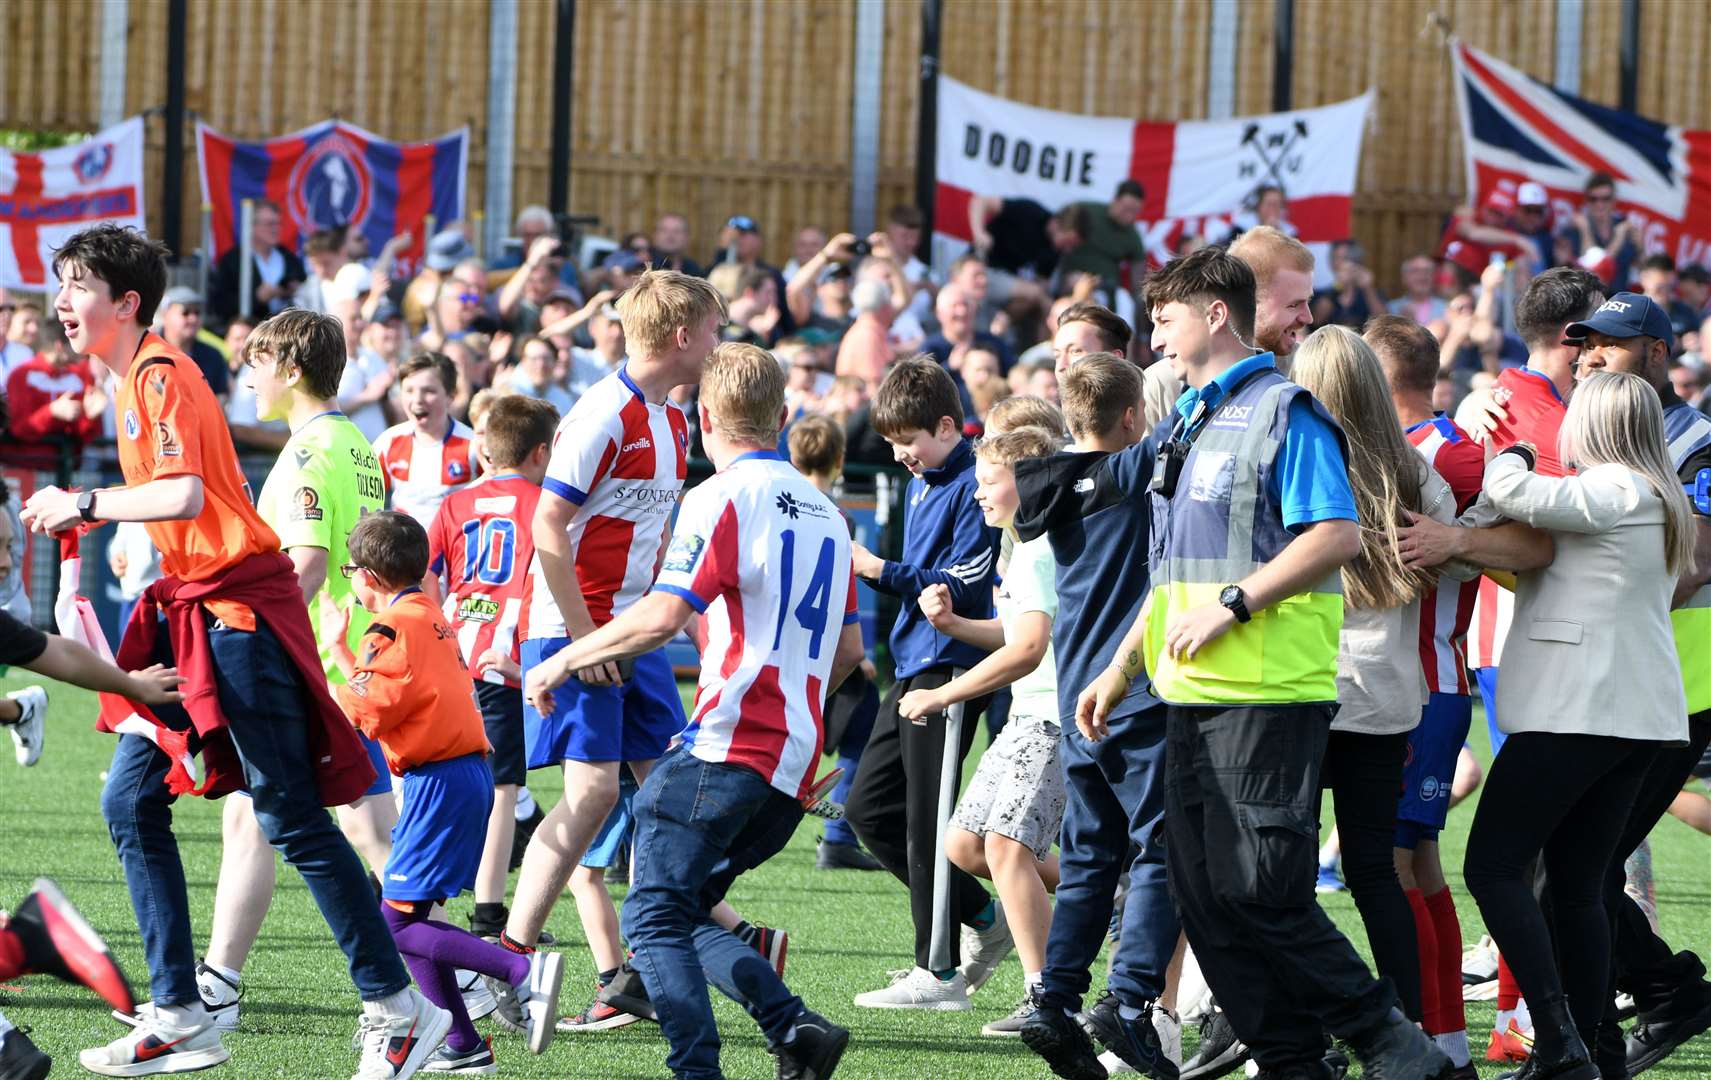 Dorking Wanderers fans rush on to celebrate their victory at the final whistle. Picture: Barry Goodwin